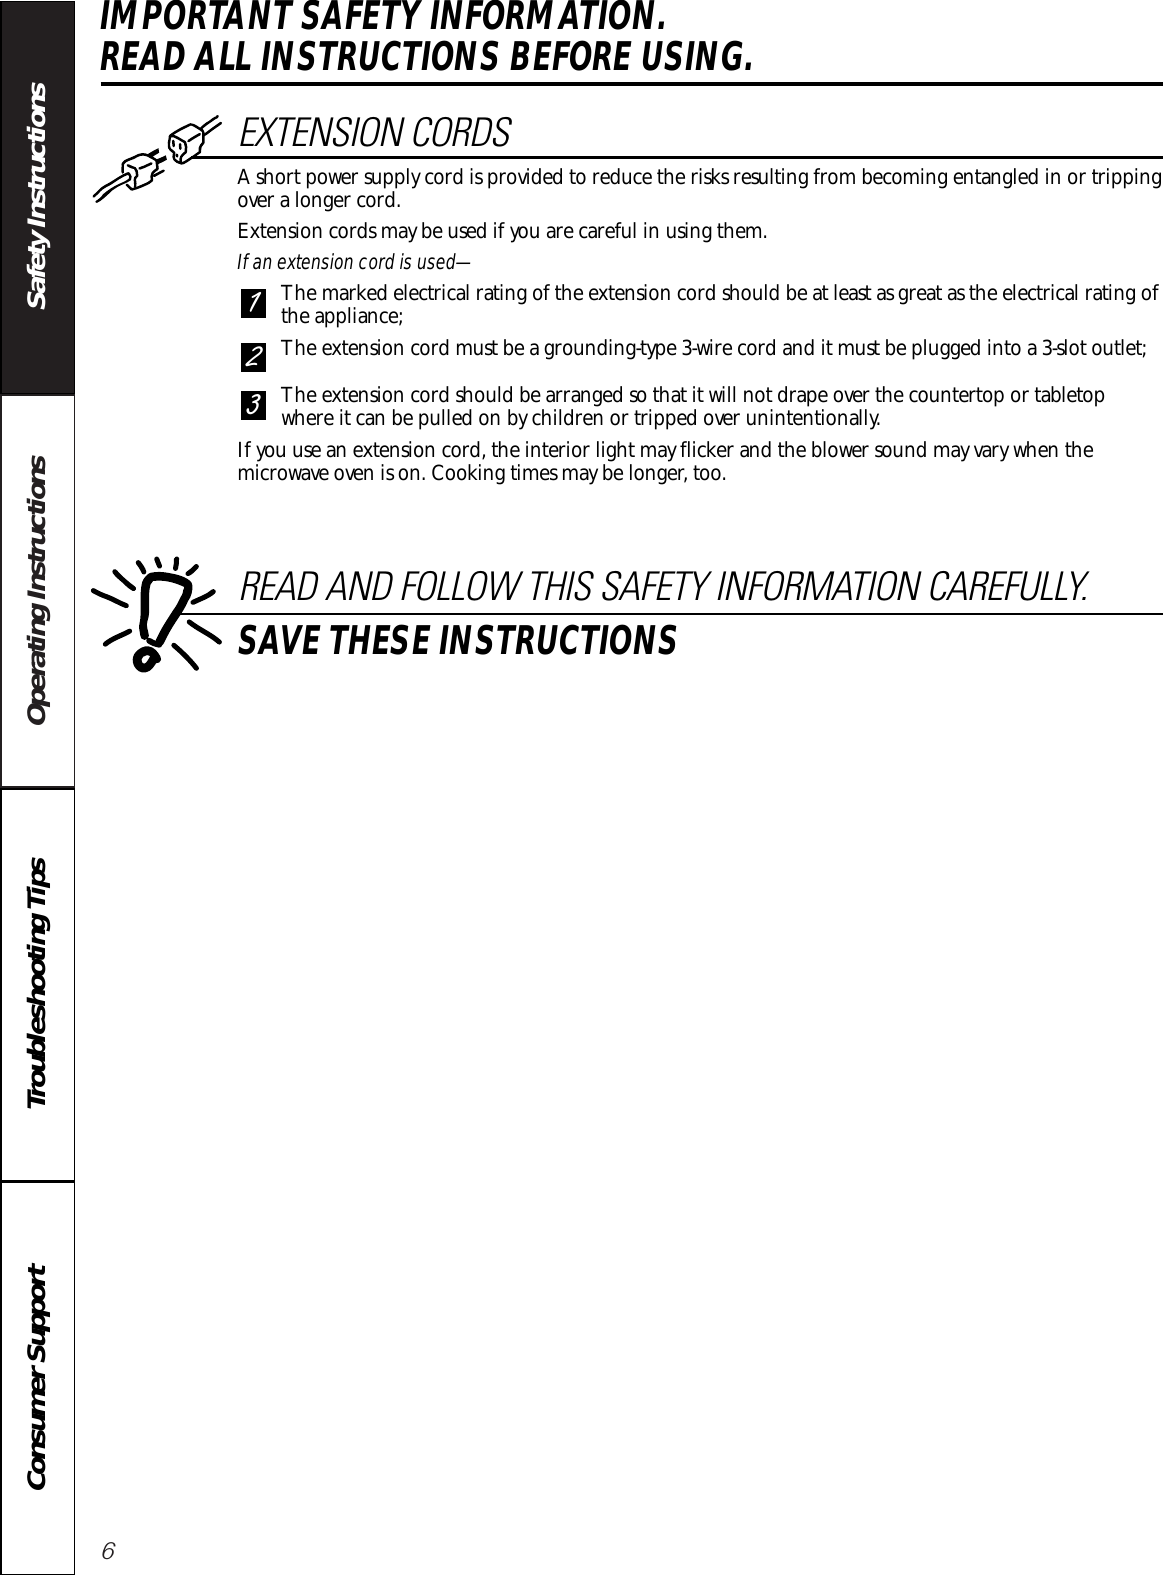 6Operating Instructions Safety InstructionsConsumer Support Troubleshooting TipsIMPORTANT SAFETY INFORMATION. READ ALL INSTRUCTIONS BEFORE USING.EXTENSION CORDSA short power supply cord is provided to reduce the risks resulting from becoming entangled in or trippingover a longer cord.Extension cords may be used if you are careful in using them.If an extension cord is used—The marked electrical rating of the extension cord should be at least as great as the electrical rating ofthe appliance;The extension cord must be a grounding-type 3-wire cord and it must be plugged into a 3-slot outlet;The extension cord should be arranged so that it will not drape over the countertop or tabletopwhere it can be pulled on by children or tripped over unintentionally.If you use an extension cord, the interior light may flicker and the blower sound may vary when themicrowave oven is on. Cooking times may be longer, too.321READ AND FOLLOW THIS SAFETY INFORMATION CAREFULLY.SAVE THESE INSTRUCTIONS